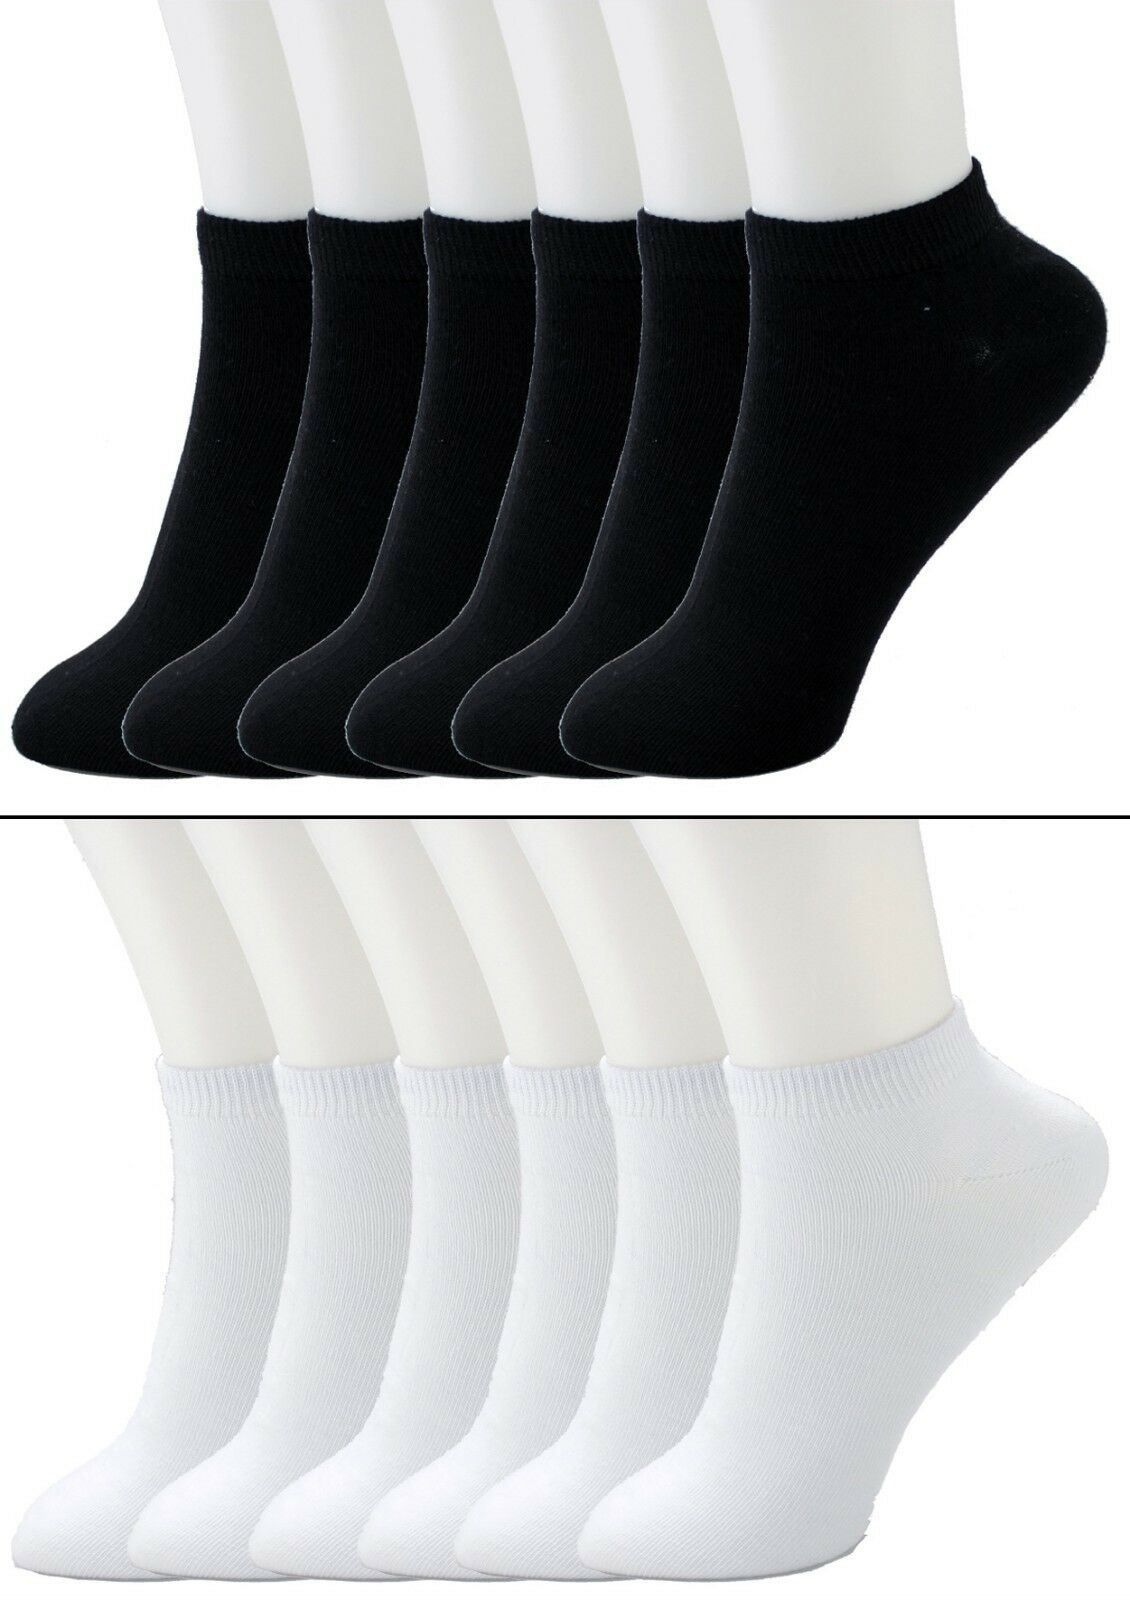 New Lot 6-12 Pairs Mens Womens Ankle Socks Cotton Low Cut Casual Size 9-11 10-13